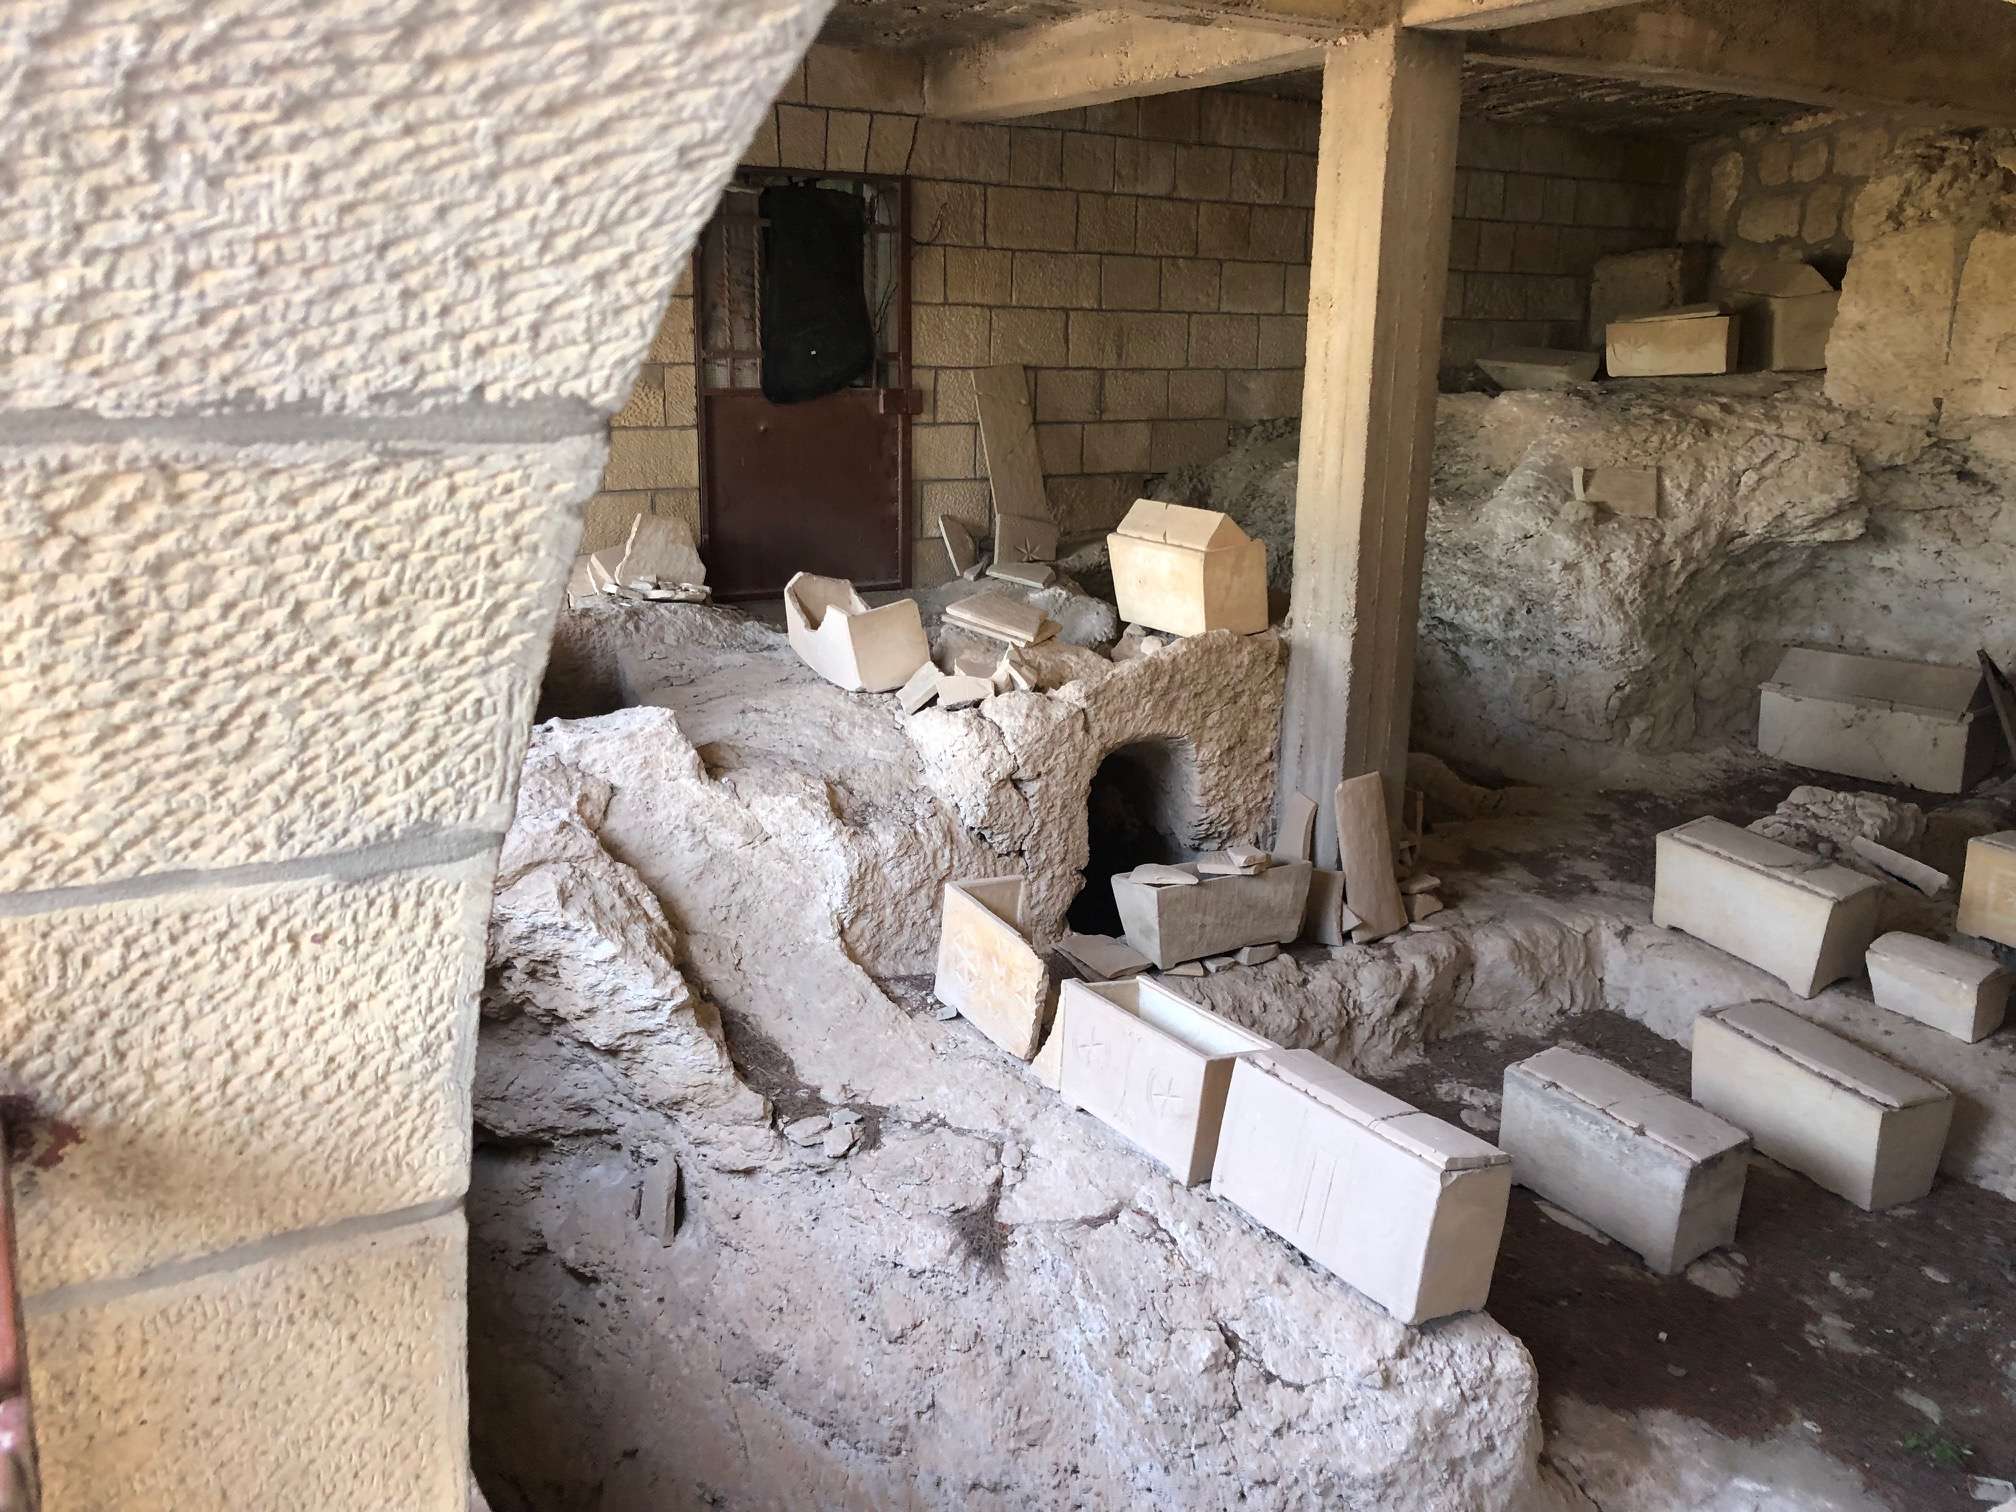 Tomb full of boxes with bones